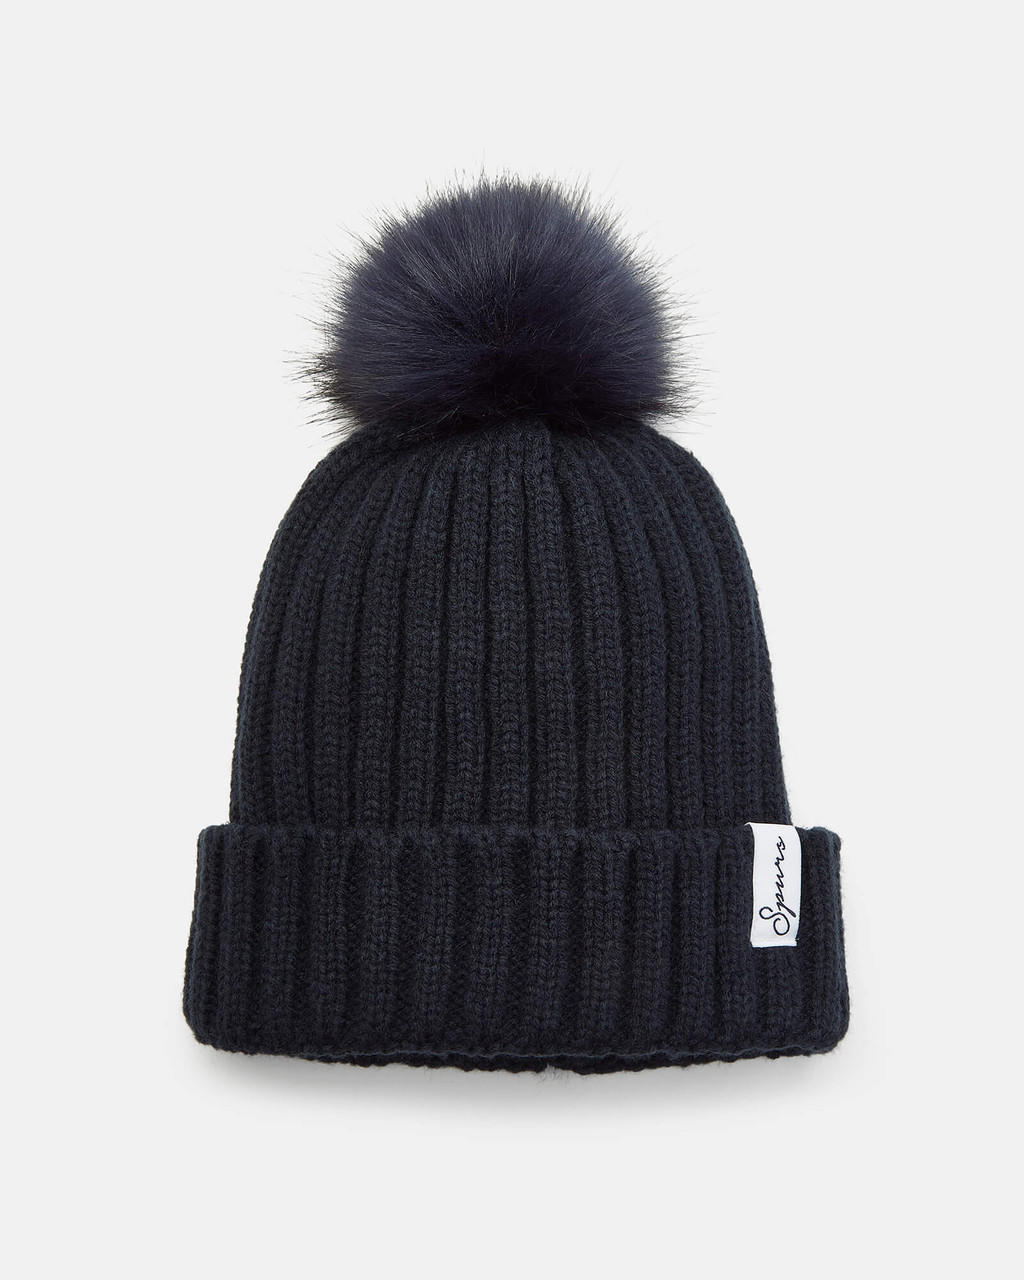 Spurs Adult Navy Beanie with Pom | Official Spurs Store